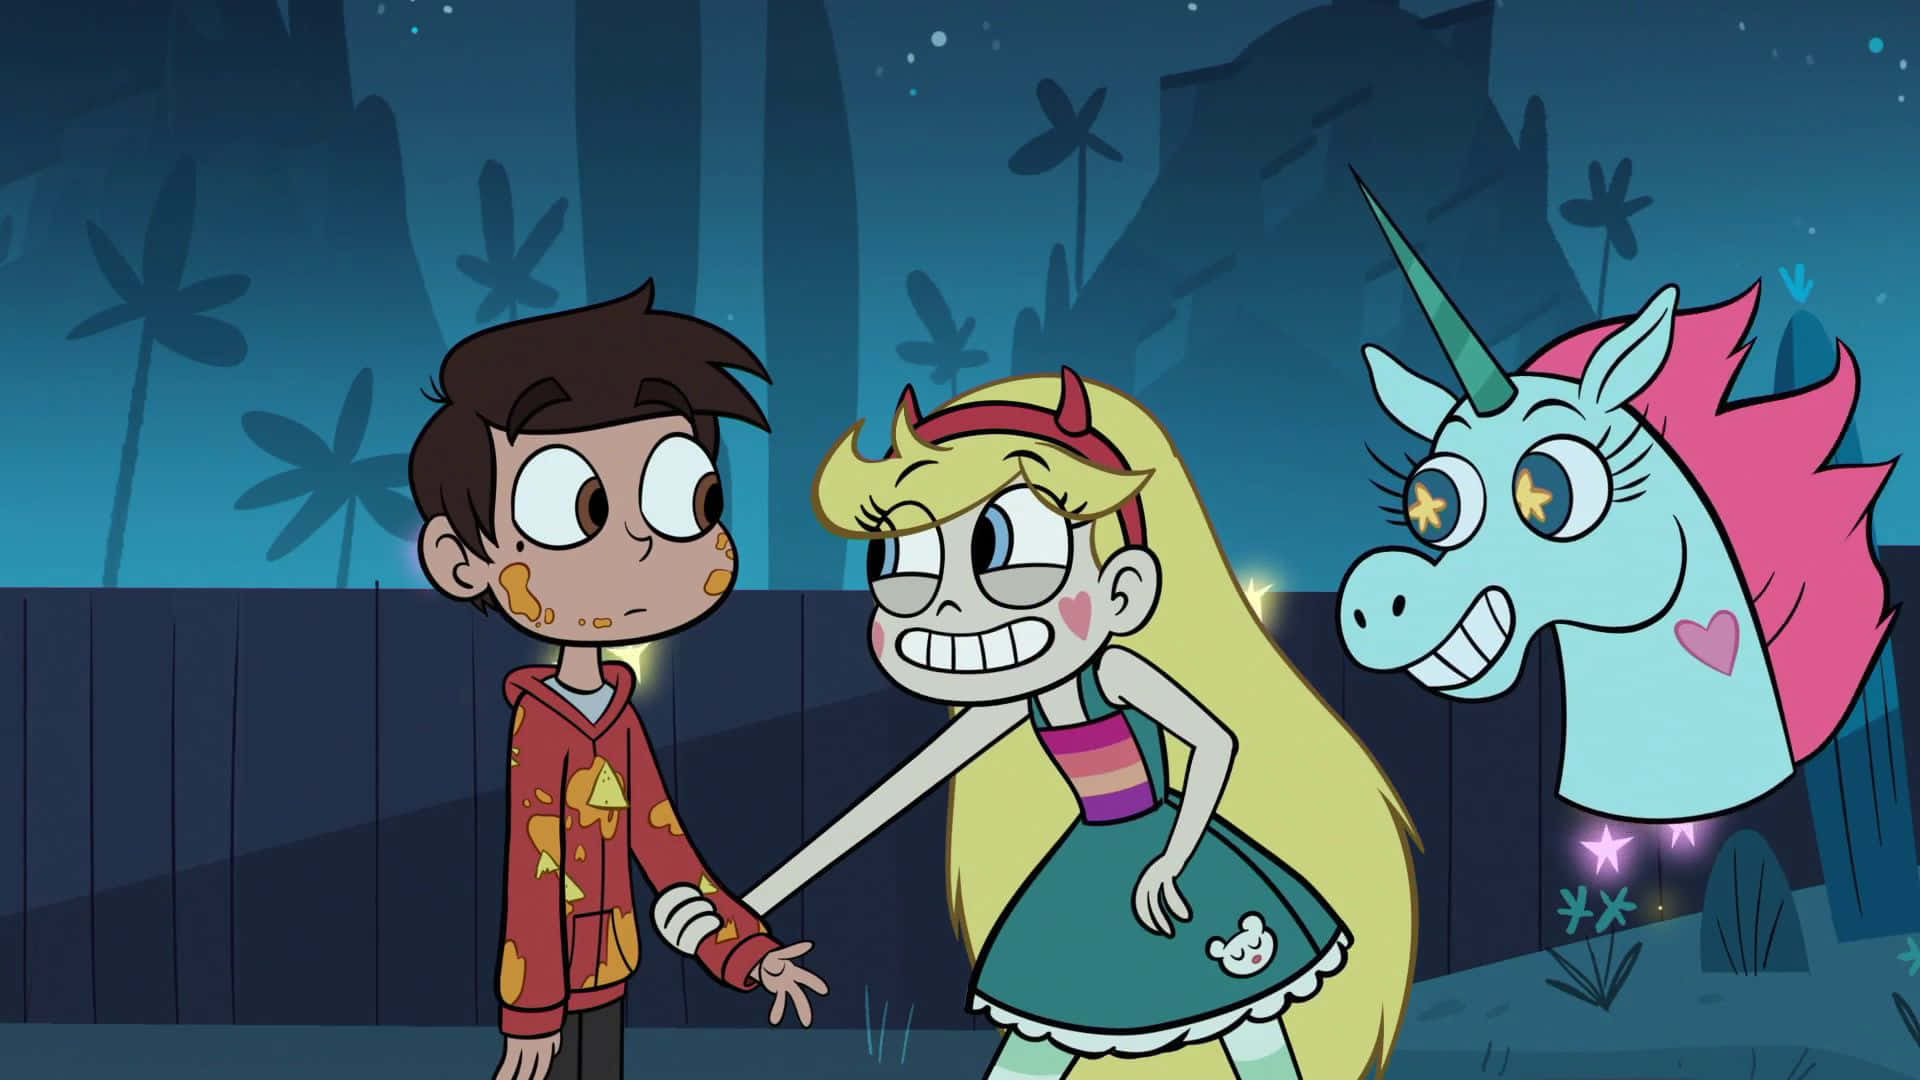 'Star butterflies and her best friend Marco Diaz take on the world with their wands in hand!'